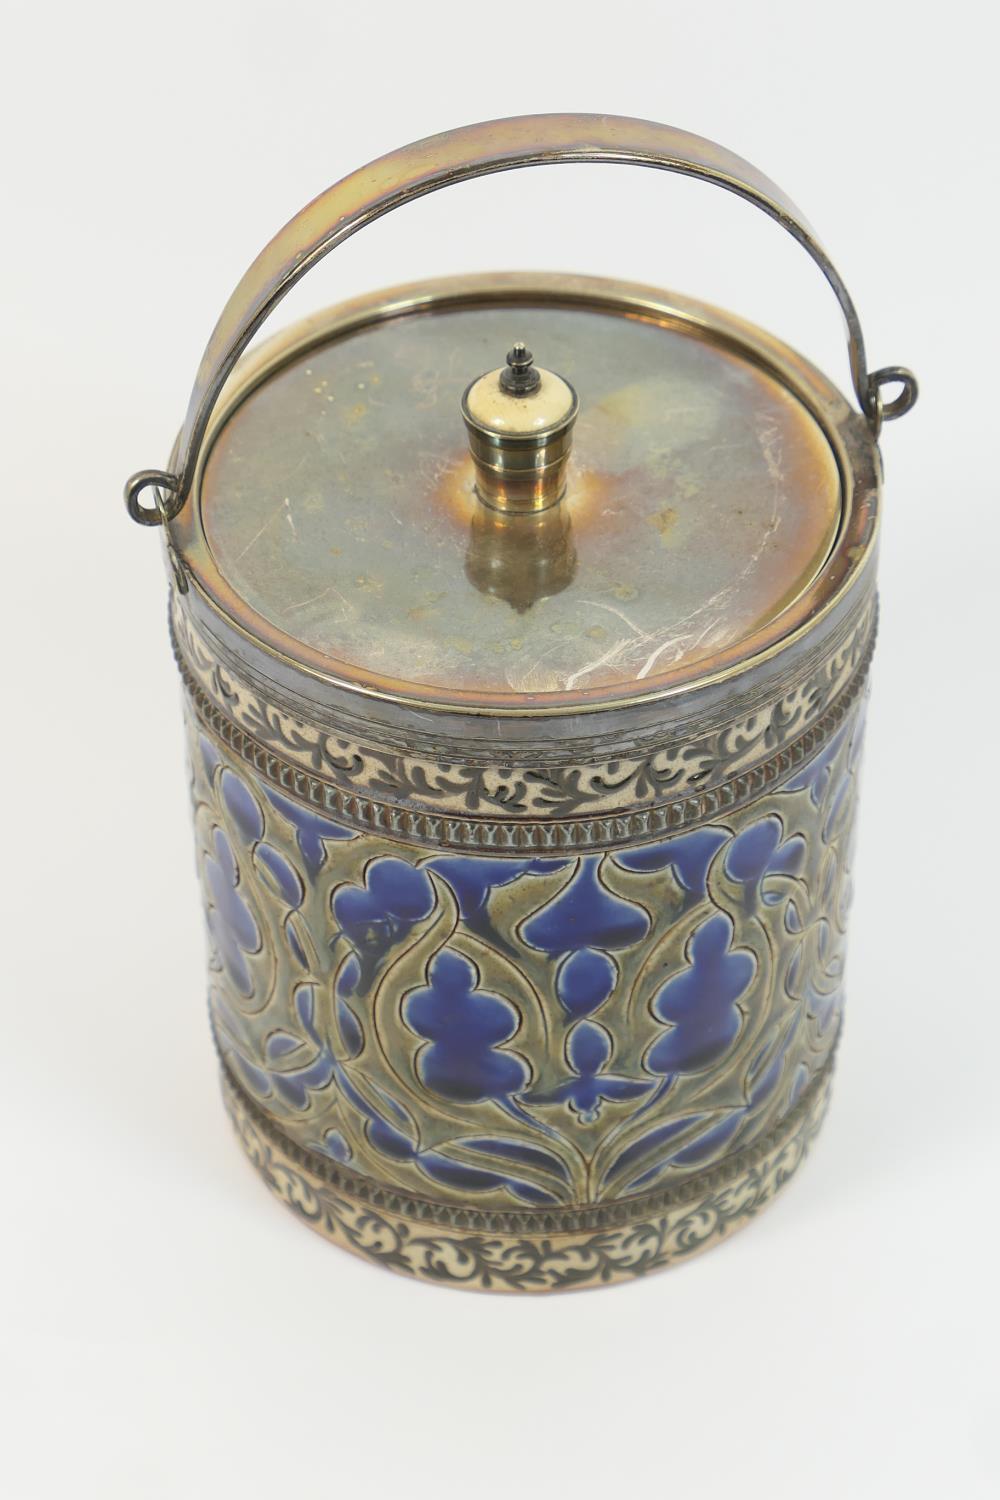 Doulton Lambeth biscuit barrel by Mark V Marshall, circa 1880, cylinder form with a silver plated - Image 2 of 7